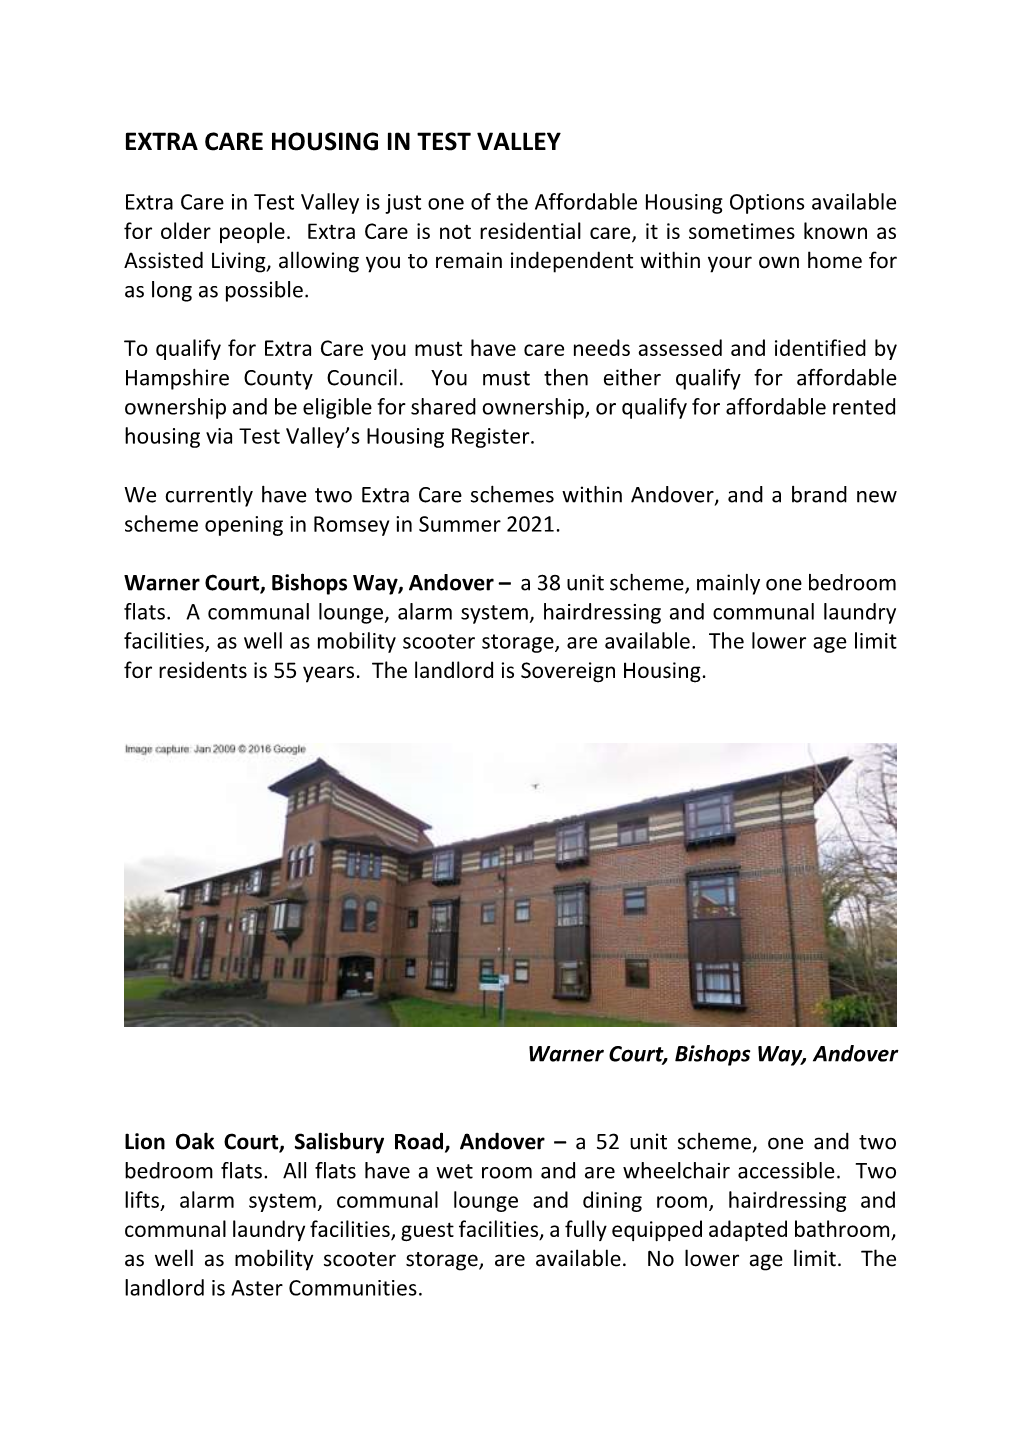 Extra Care Housing in Test Valley